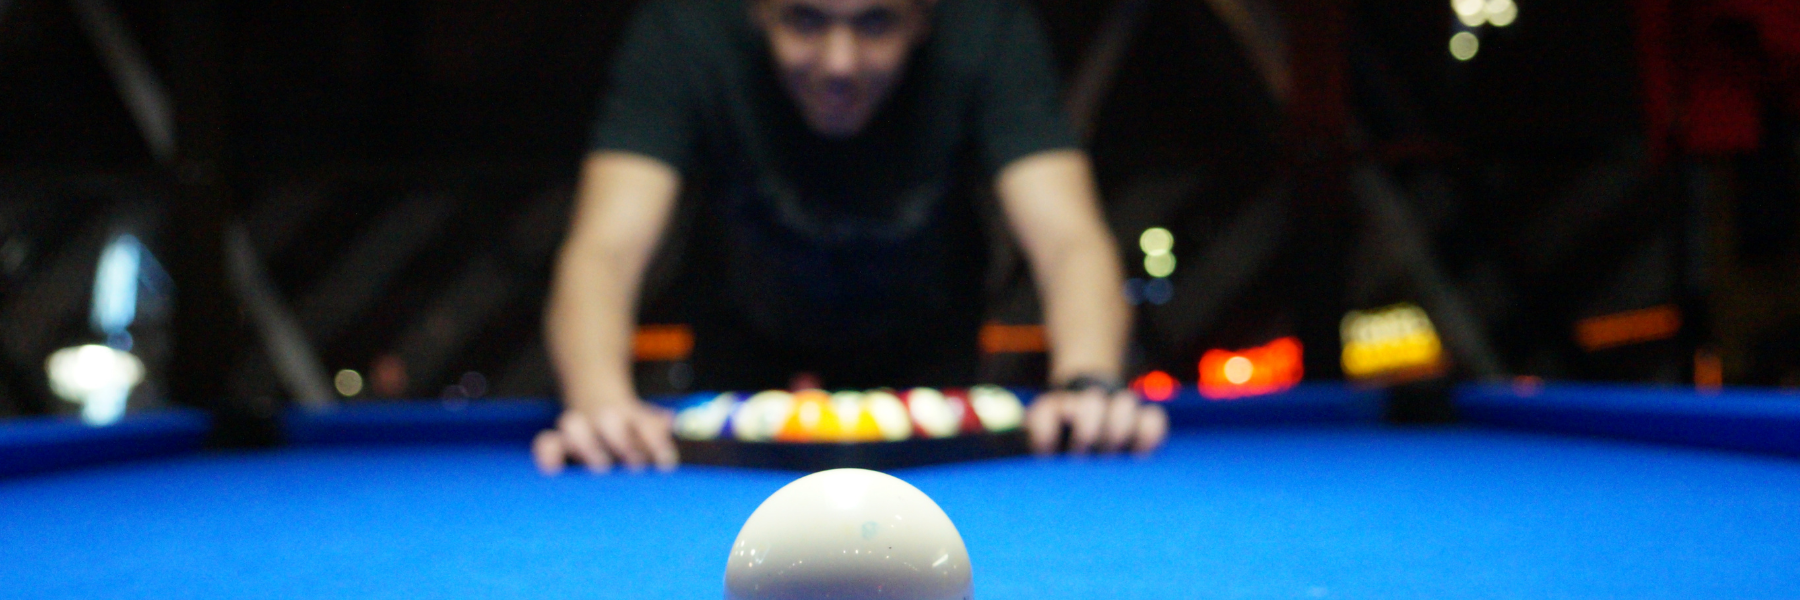 Things to Know Before Buying a Pool Table